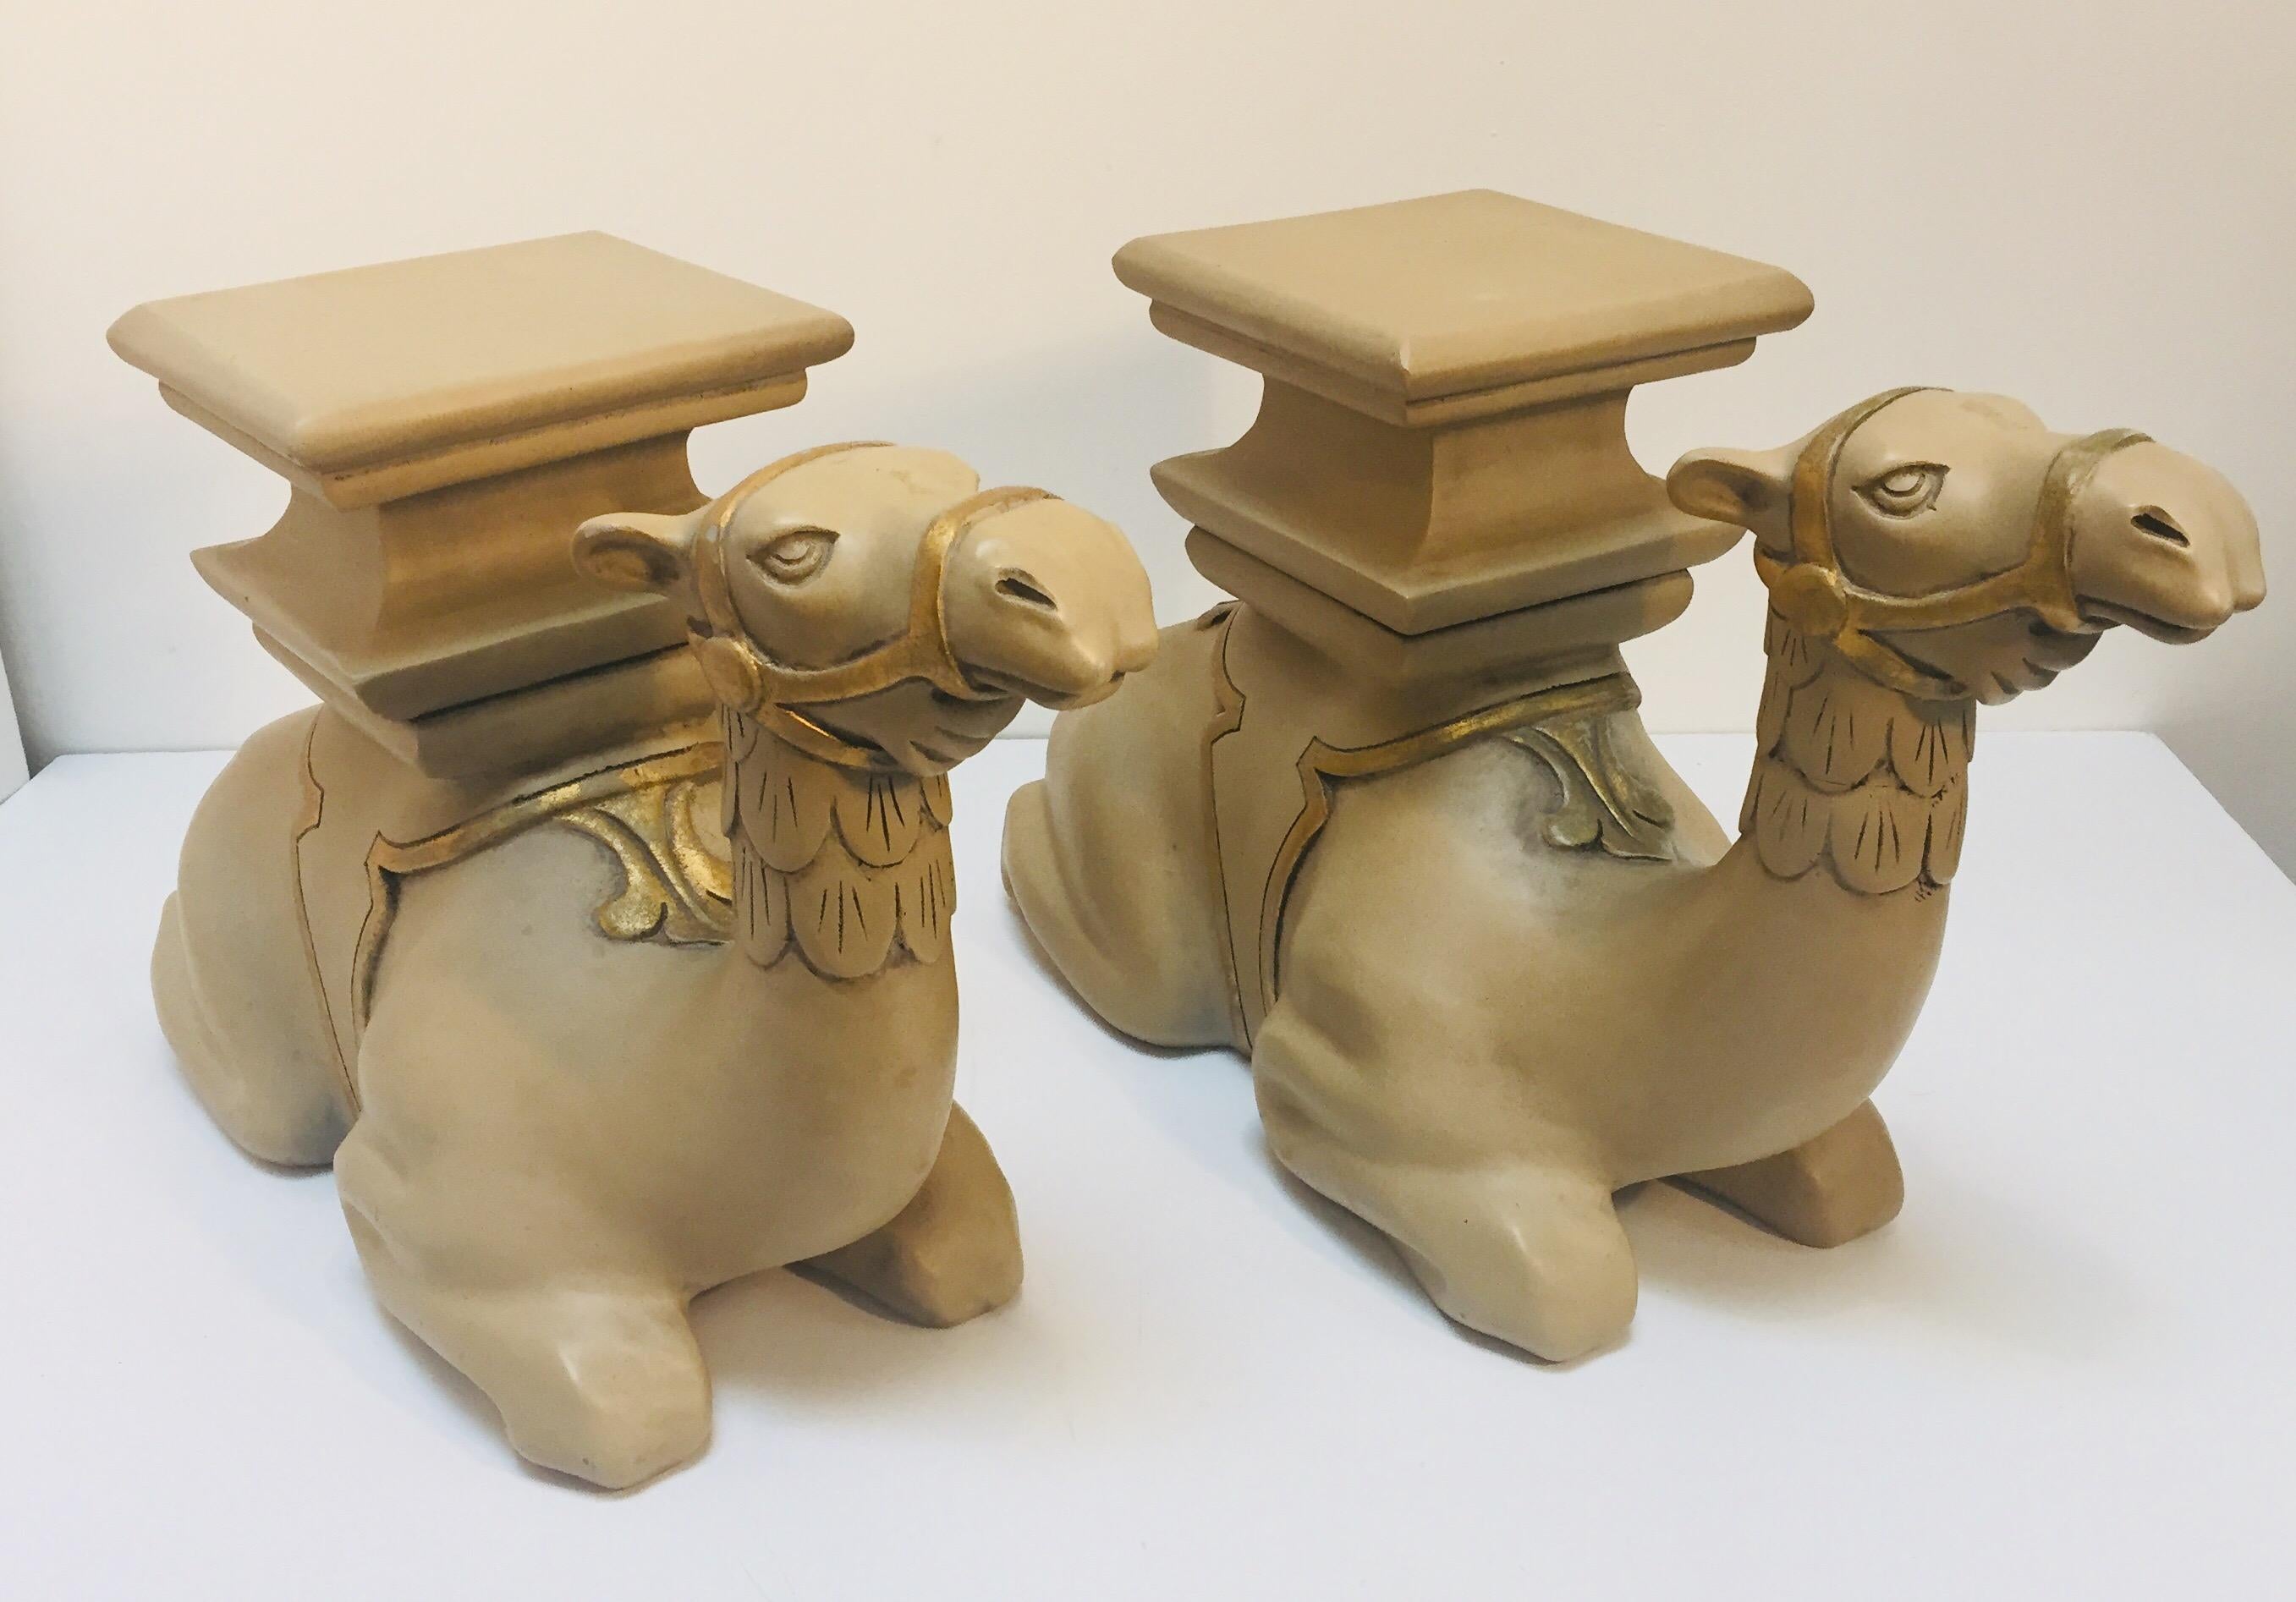 Pair of decorative Moroccan kneeling camel sculptures to use as stools or side tables.
1950s wood carved camel sculptures, USA, 1950s.
Beautiful sand color with gold details, these stools could be use for plant Stand, stools or side tables.
Will